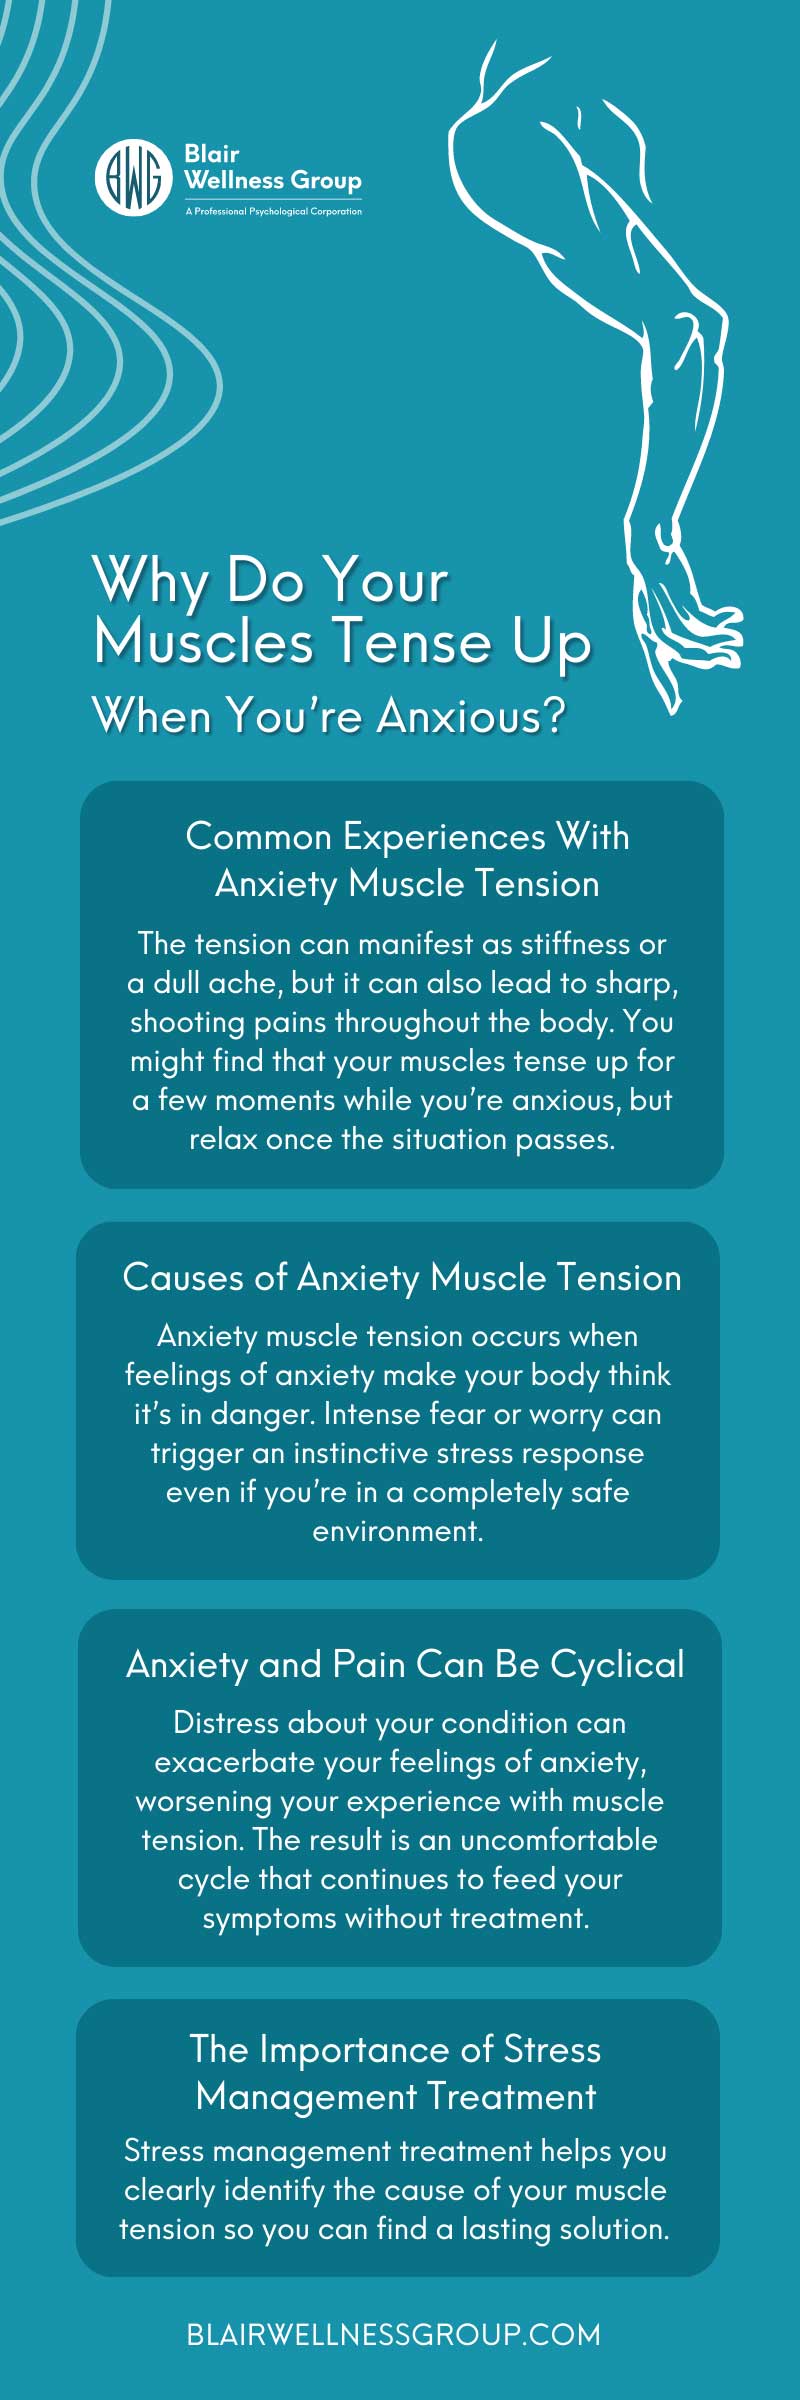 Why Is Anxiety So Common Today?